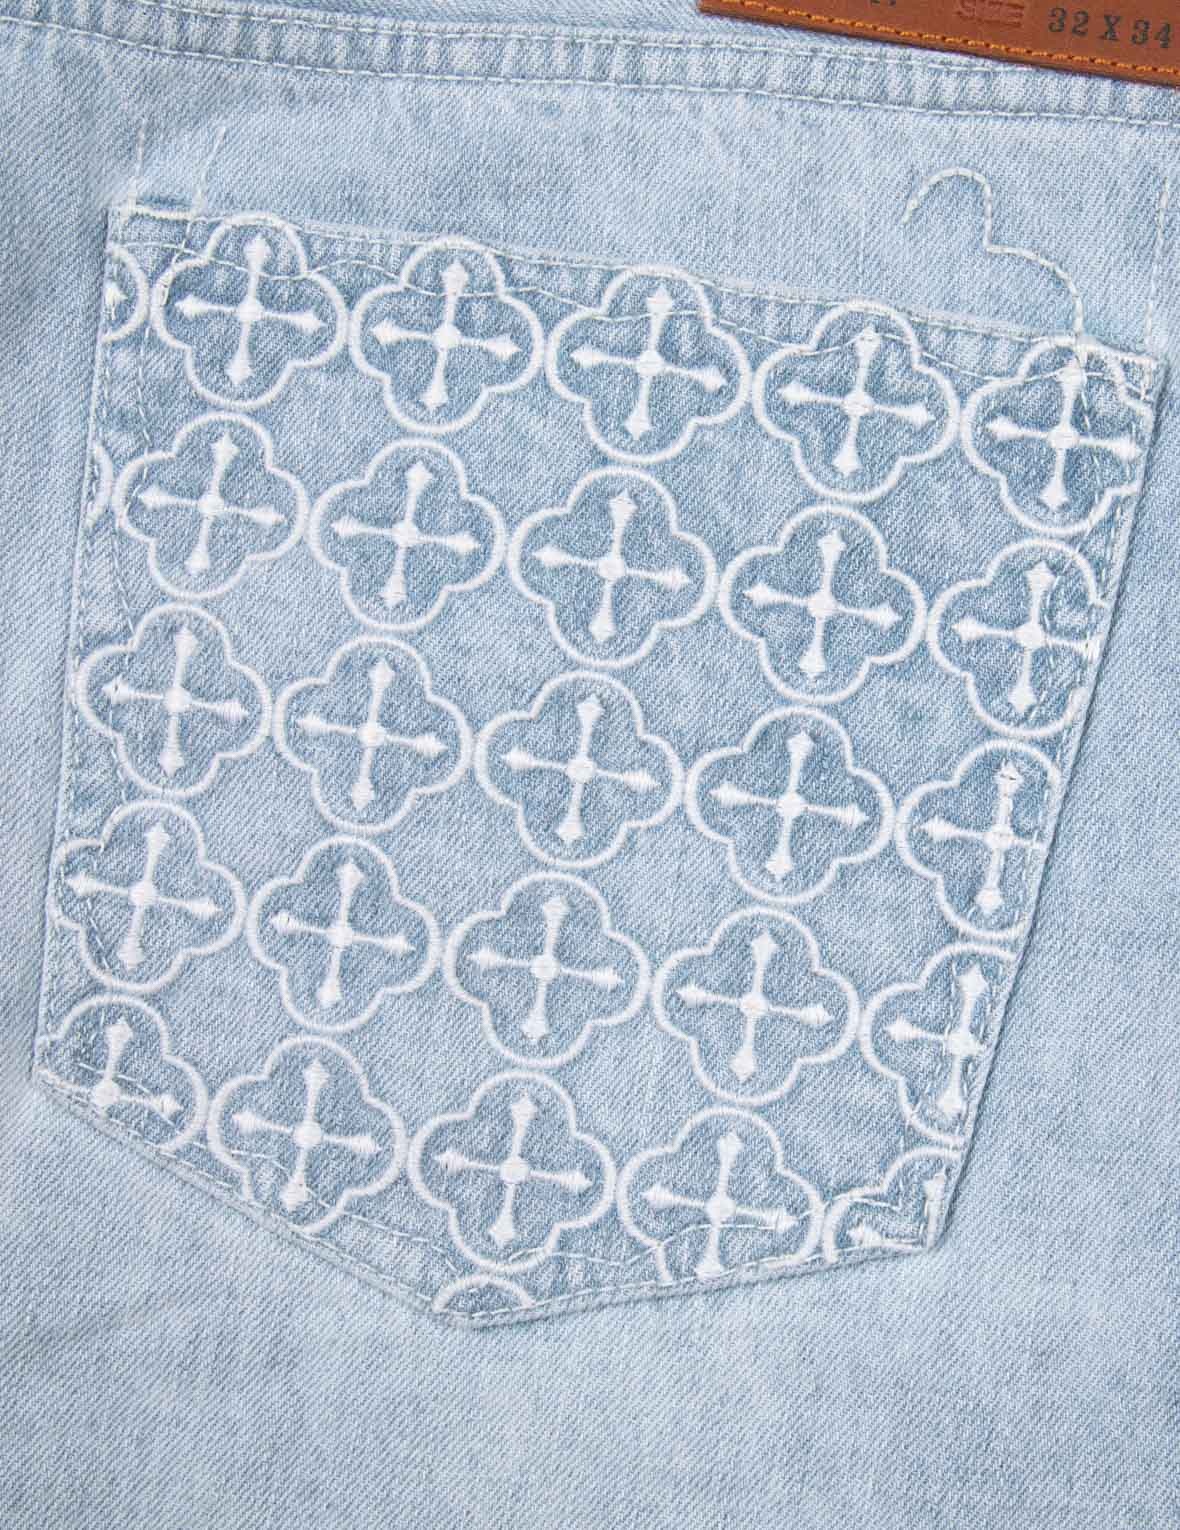 PATCHWORK EFFECT AND SASHIKO CARROT FIT DENIM JEANS #2017 - 8